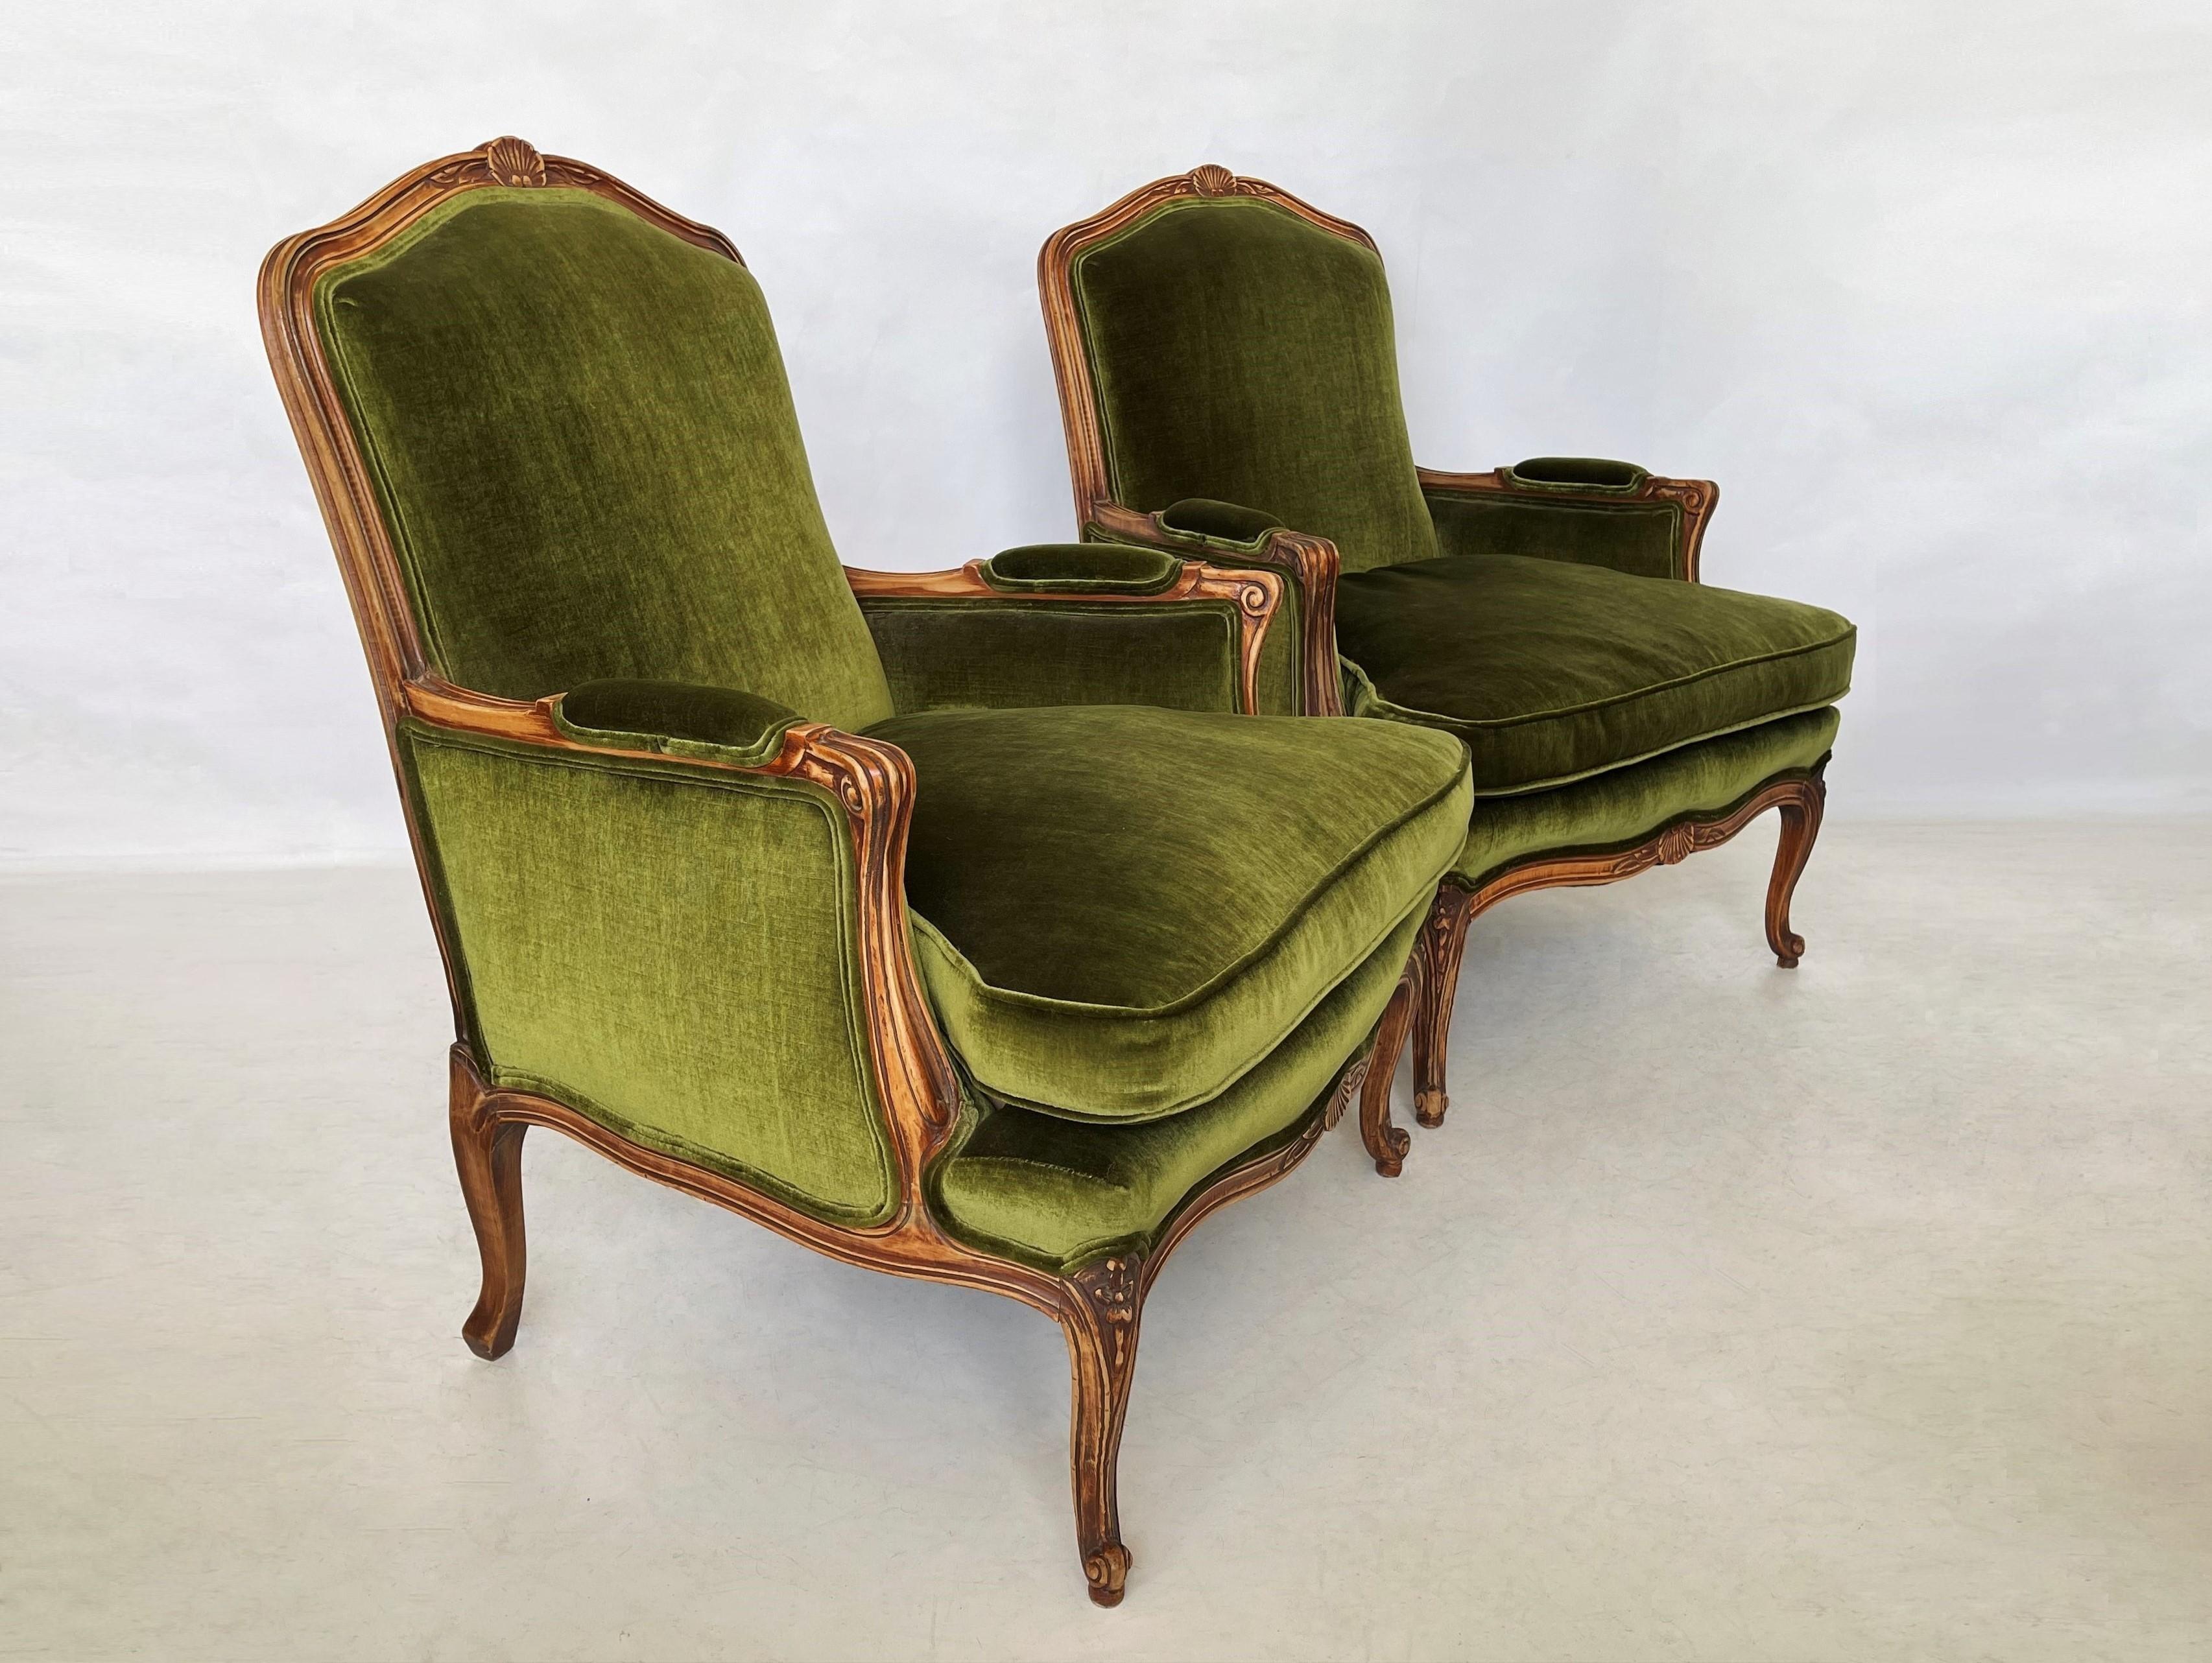 A lovely pair of carved French provincial Louis XV style bergères. Each with a cartouche-shape with carved cresting, padded back into down-swept out-scrolled padded arms over a cushion seat. Carved serpentine apron standing on four cabriole legs